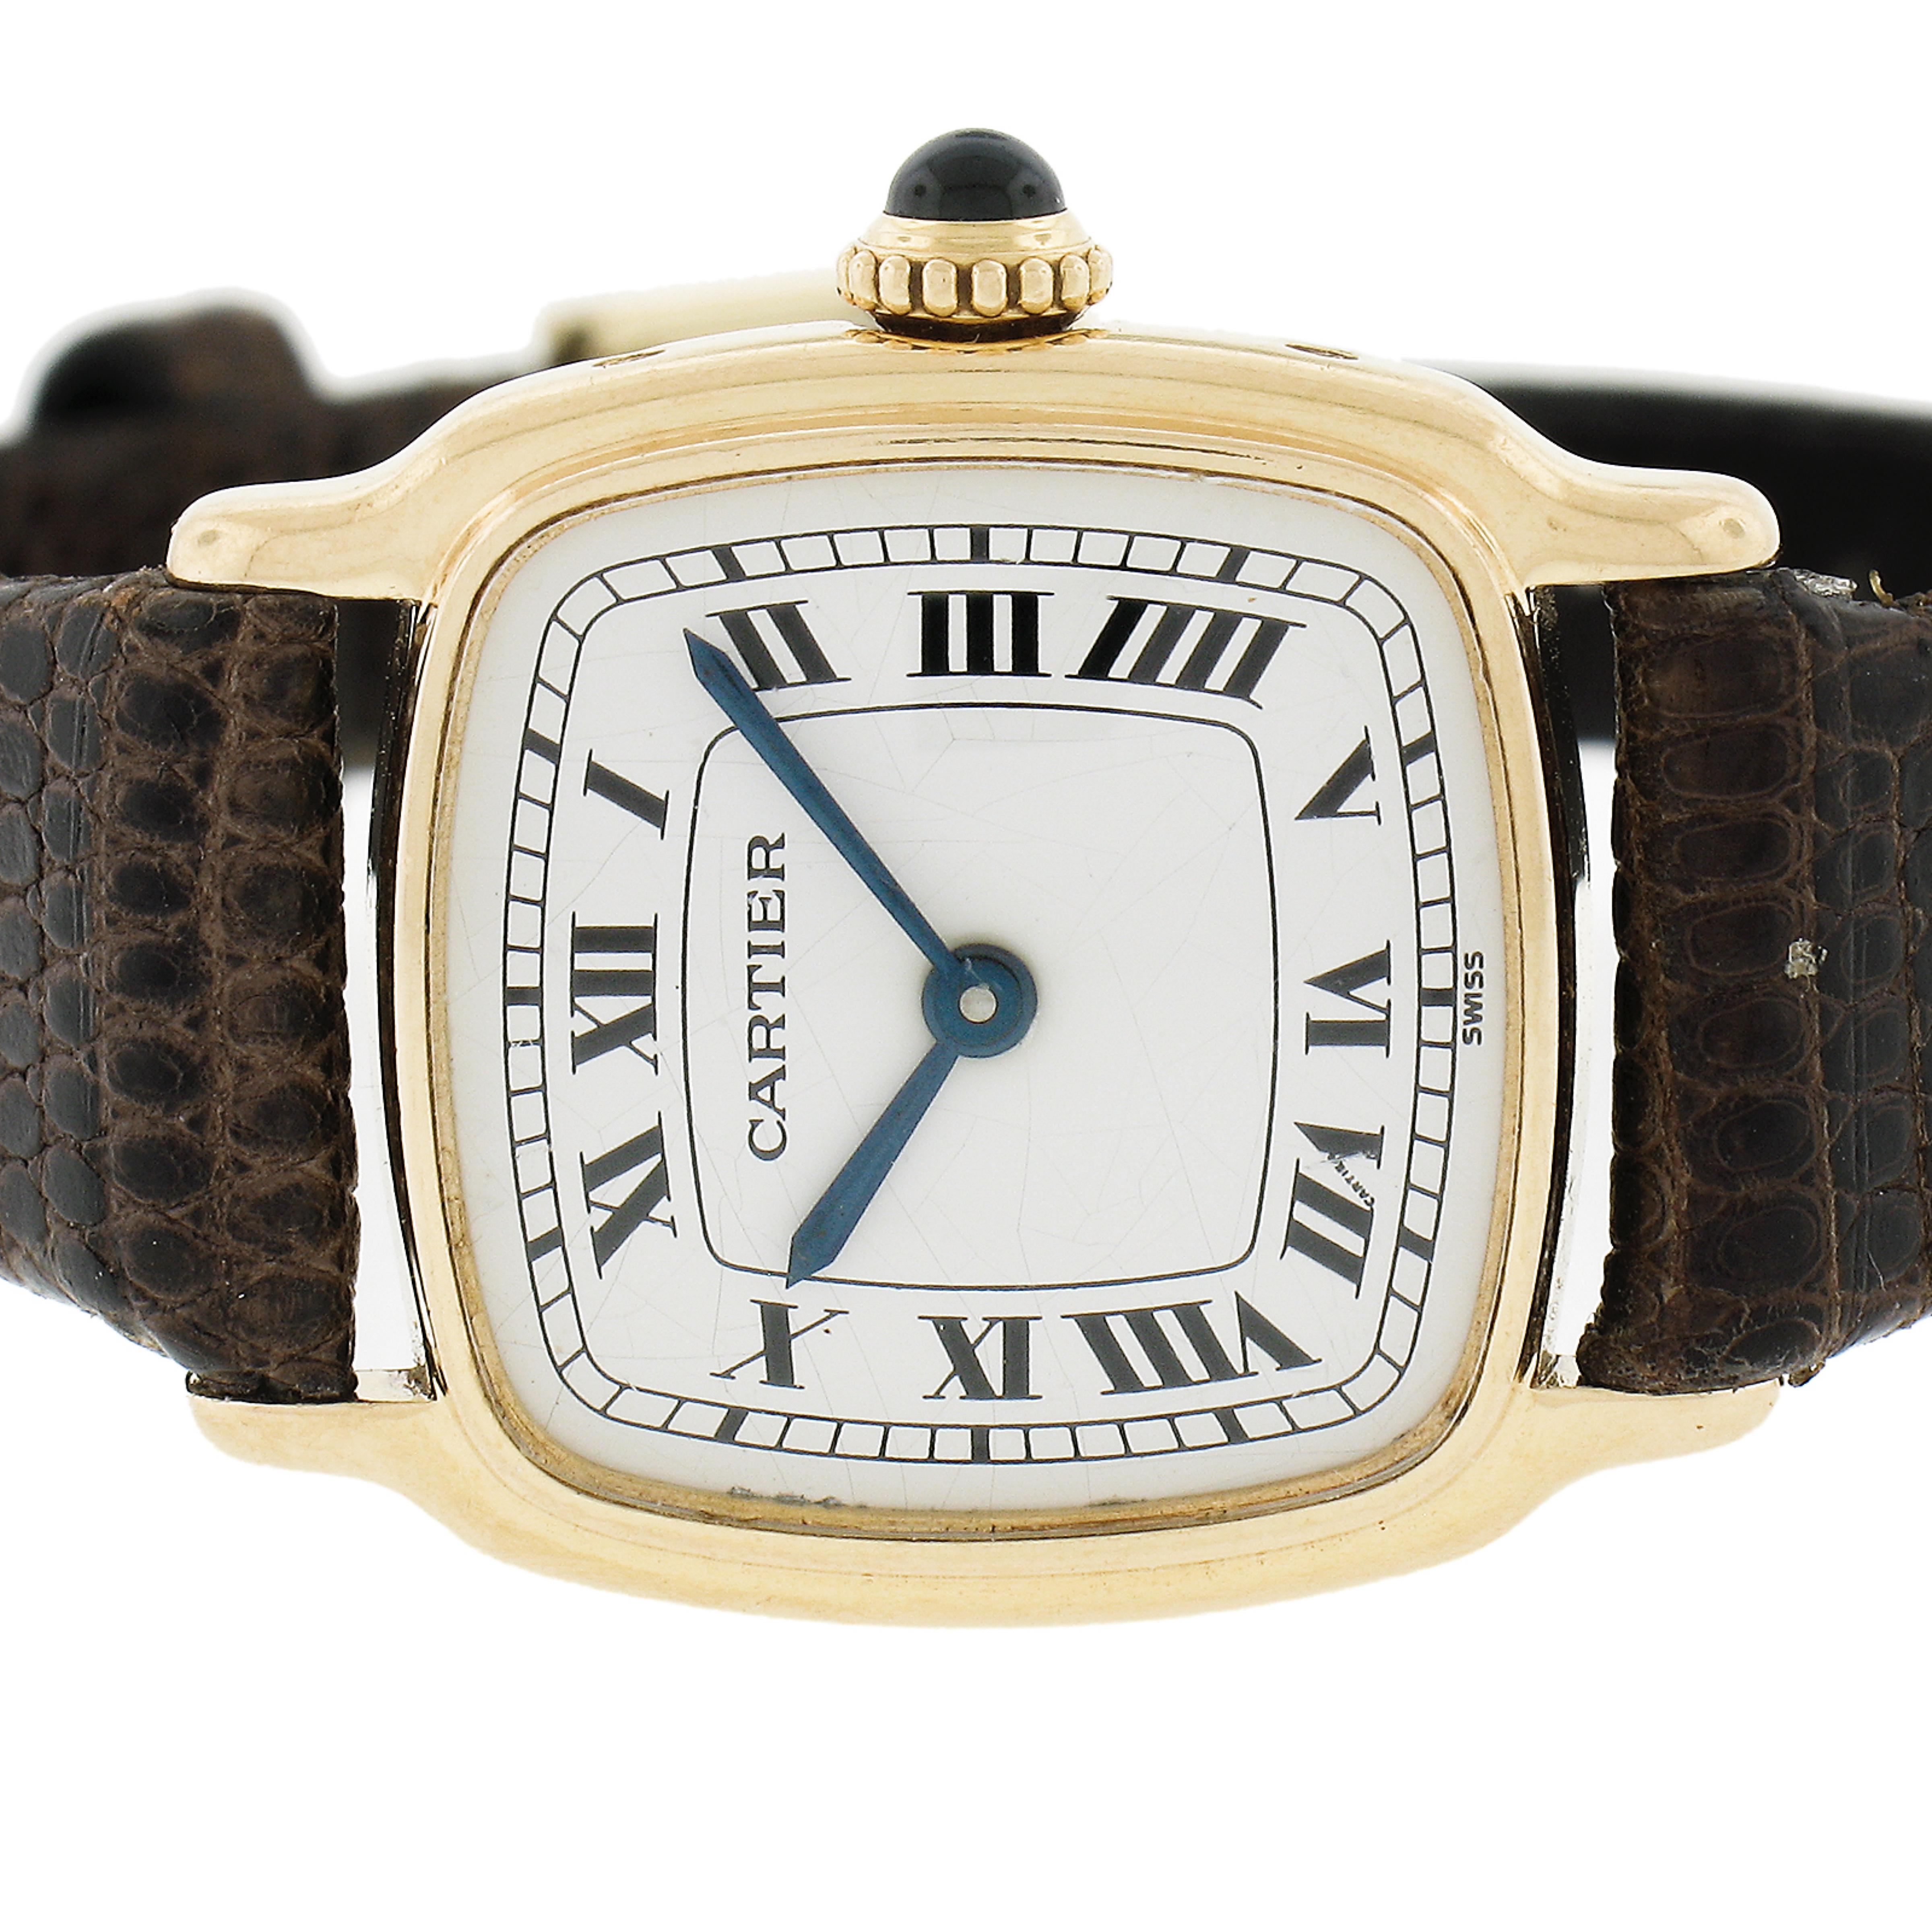 Vintage Cartier 18k Gold 21mm Cushion Shape Mechanical Hand Wound Wrist Watch In Good Condition For Sale In Montclair, NJ